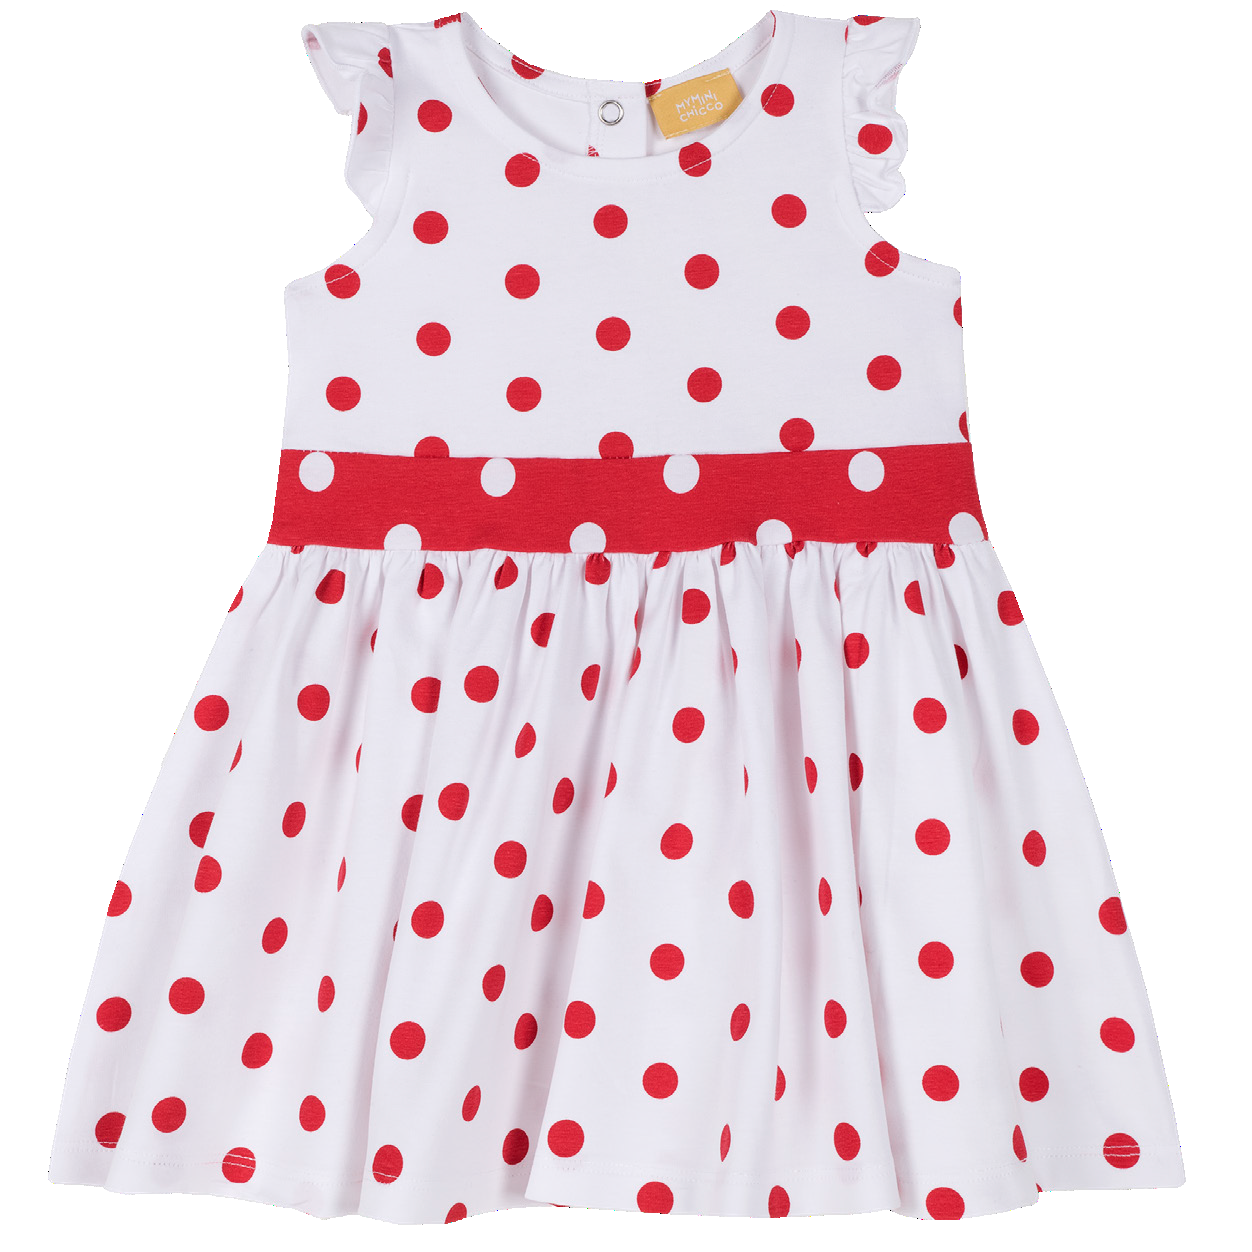 chicco dresses online